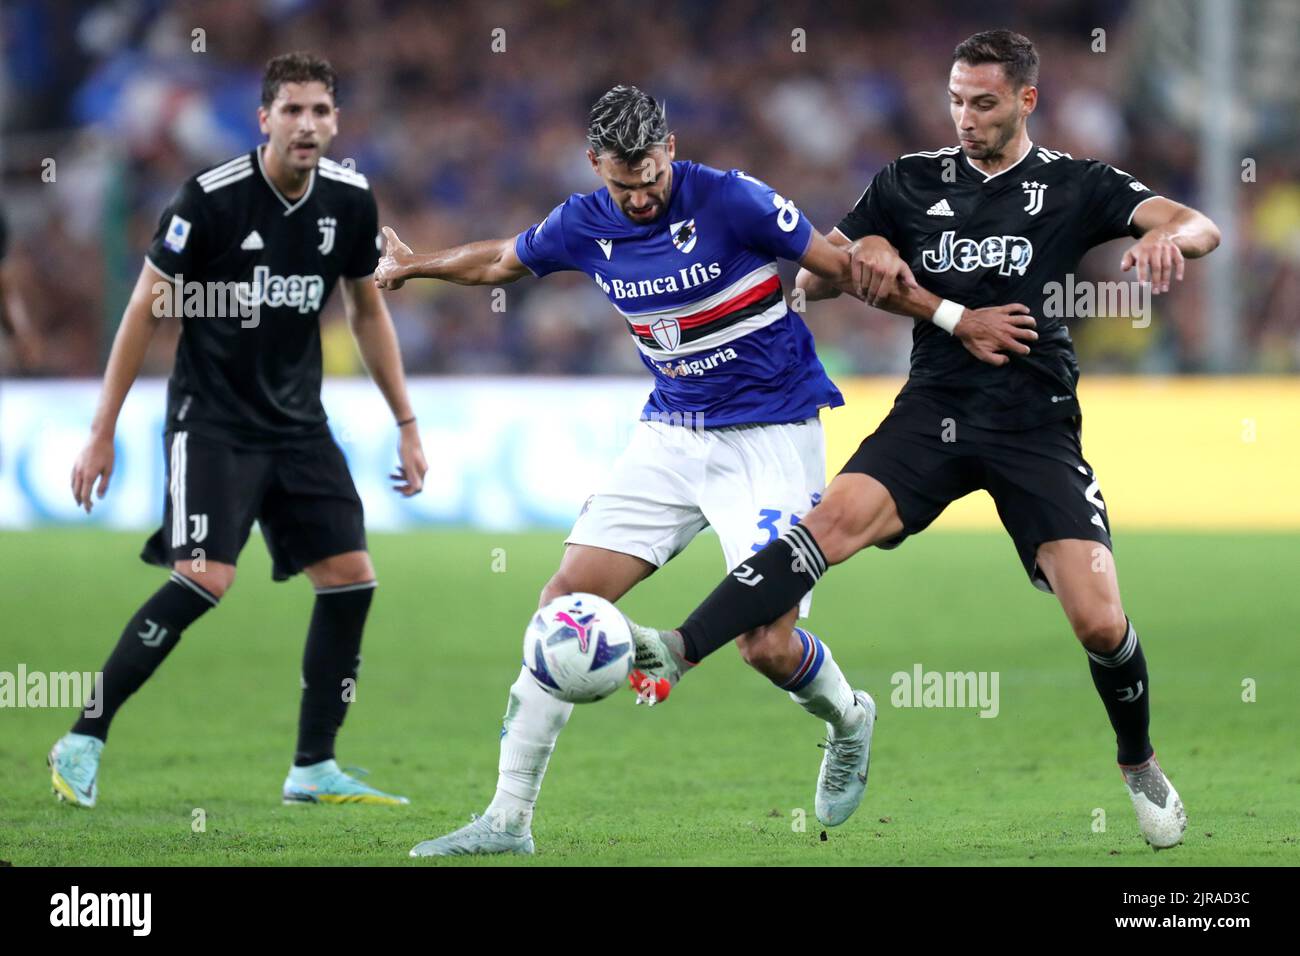 Genova, Italy. 22nd Aug, 2022. Mehdi Leris of Us Sampdoria and Mattia De Sciglio of Juventus Fc battle for the ball during the Serie A match beetween Us Sampdoria and Juventus Fc at Stadio Luigi Ferraris on August 22, 2022 in Genova, Italy . Credit: Marco Canoniero/Alamy Live News Stock Photo